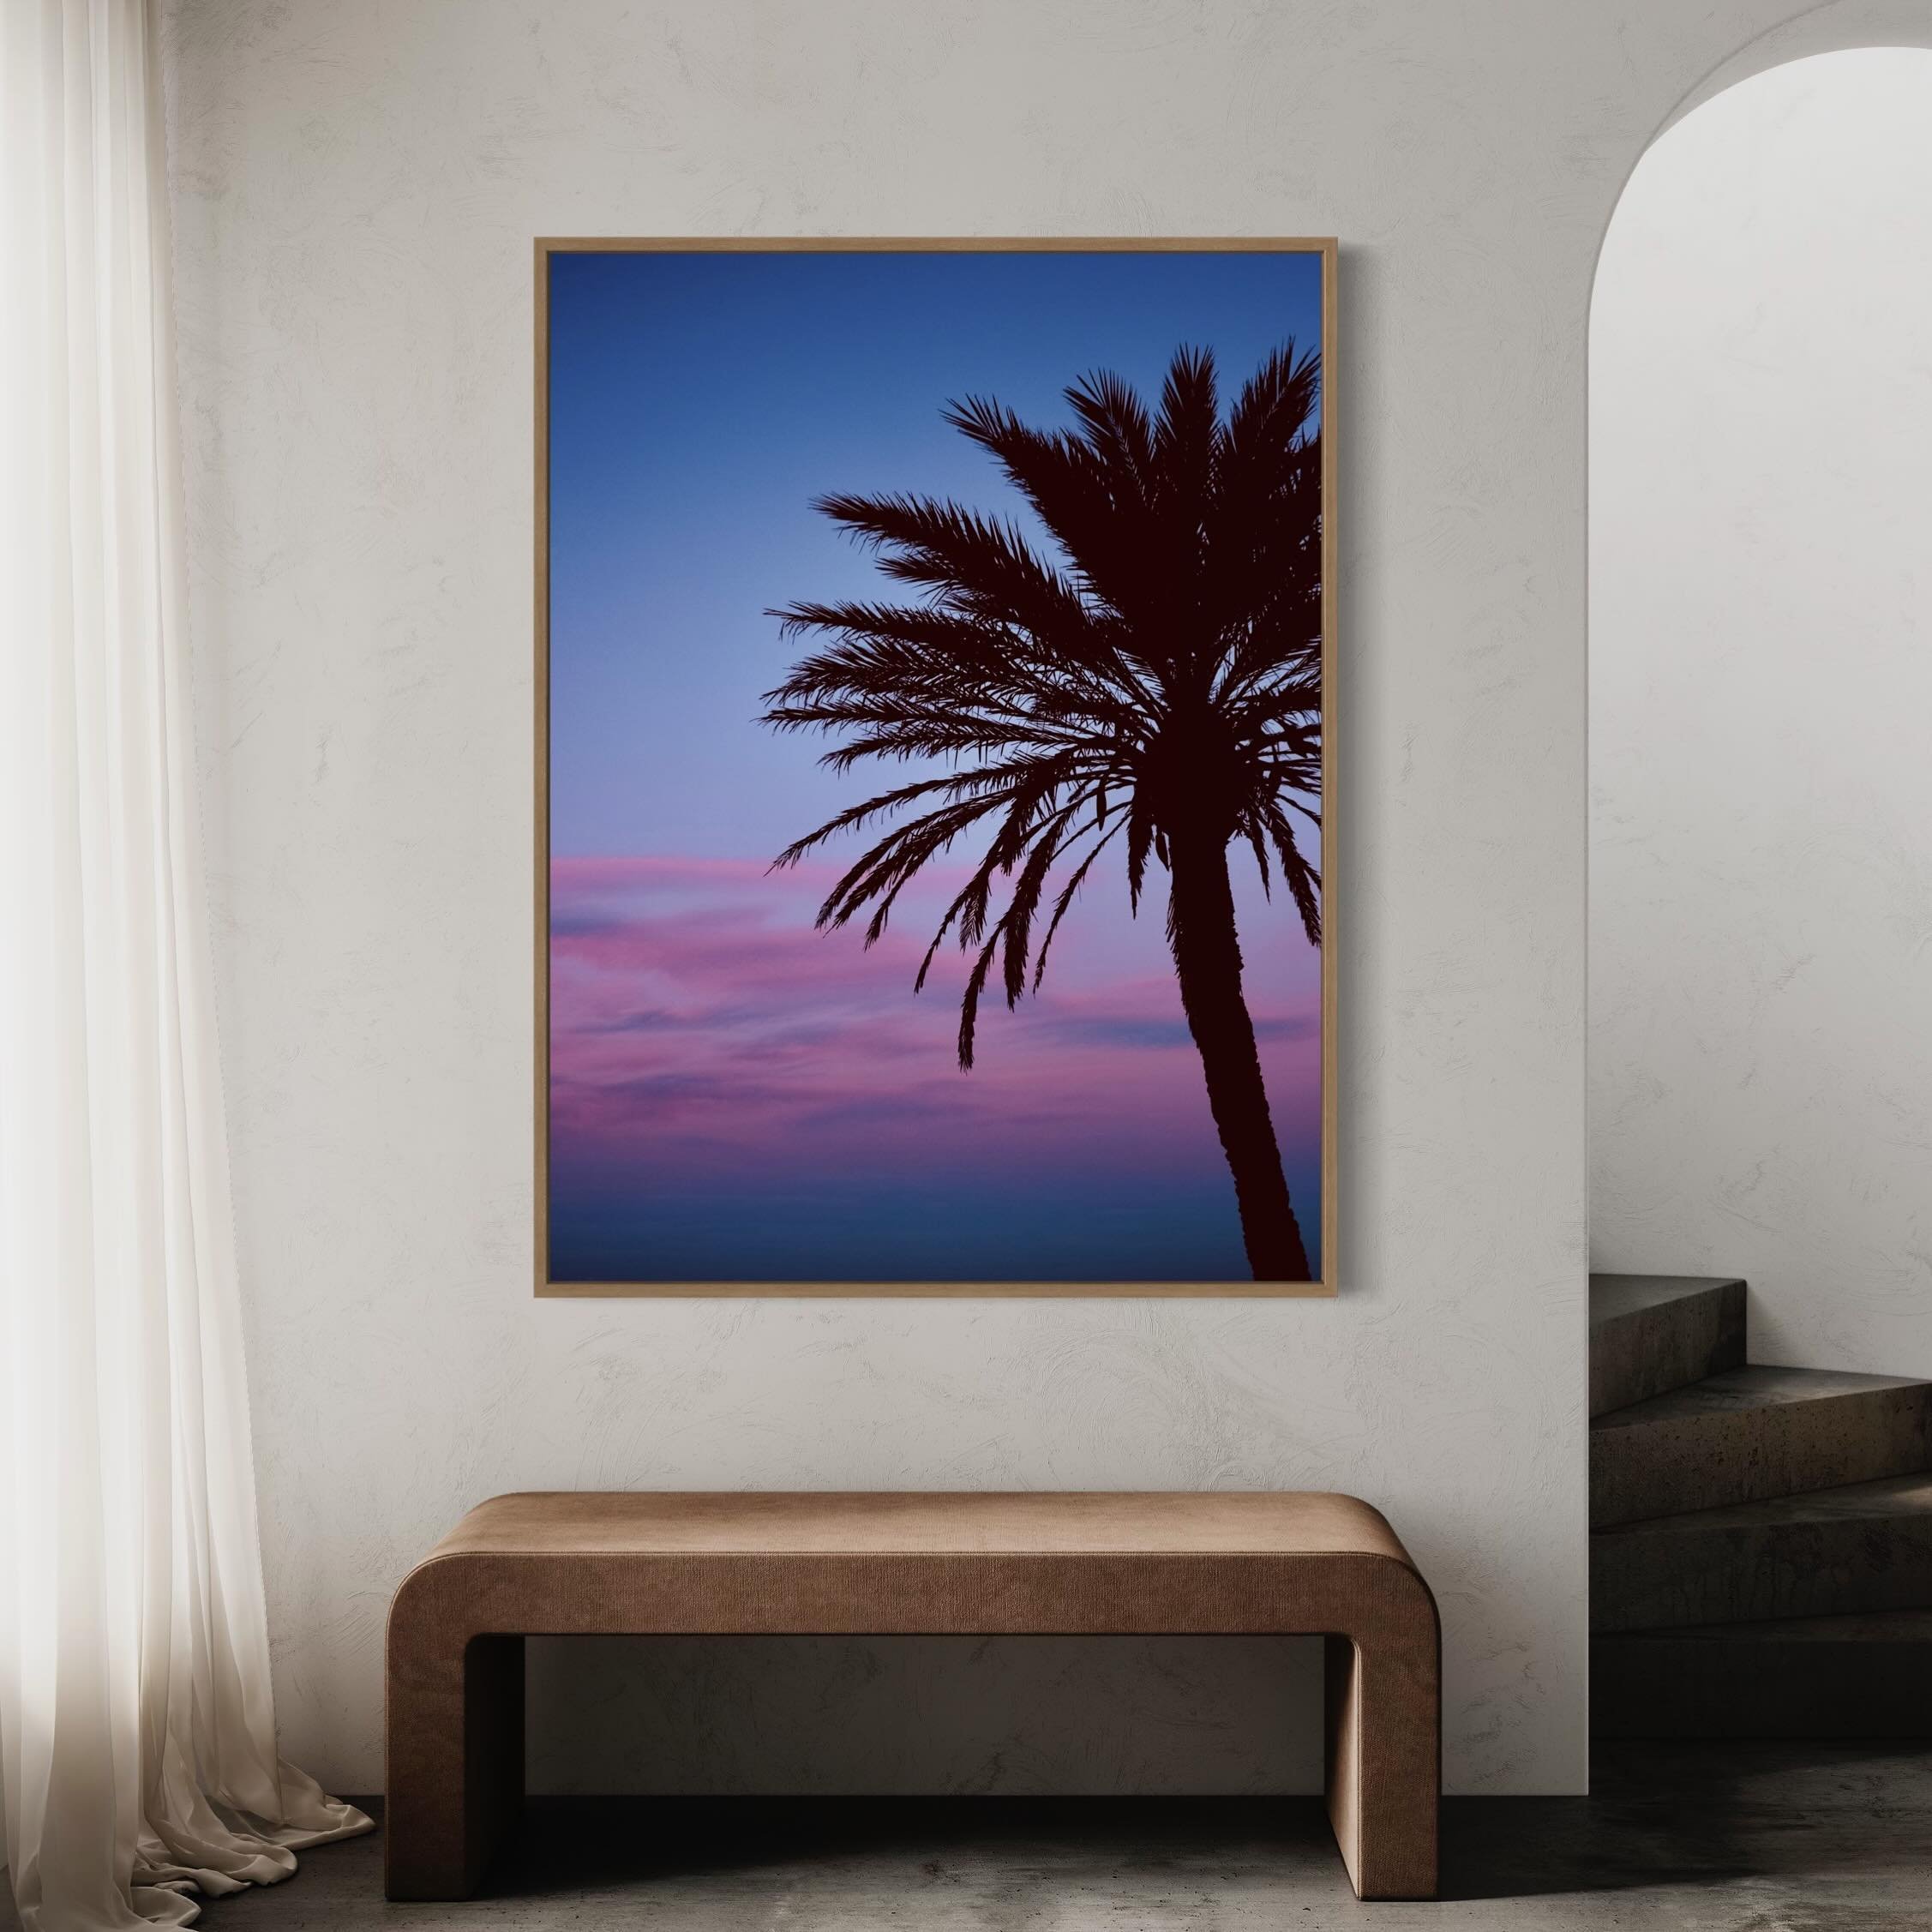 Pink Shadow.

Now available in the usual sizes. Worldwide delivery is available. See website for more information.
.
.
.
.
#antibes #shadow #sunset #sun #beach #beachlife #holiday #summer #lifestyle #design #pink #france #vintage #hotel #sky #home #j